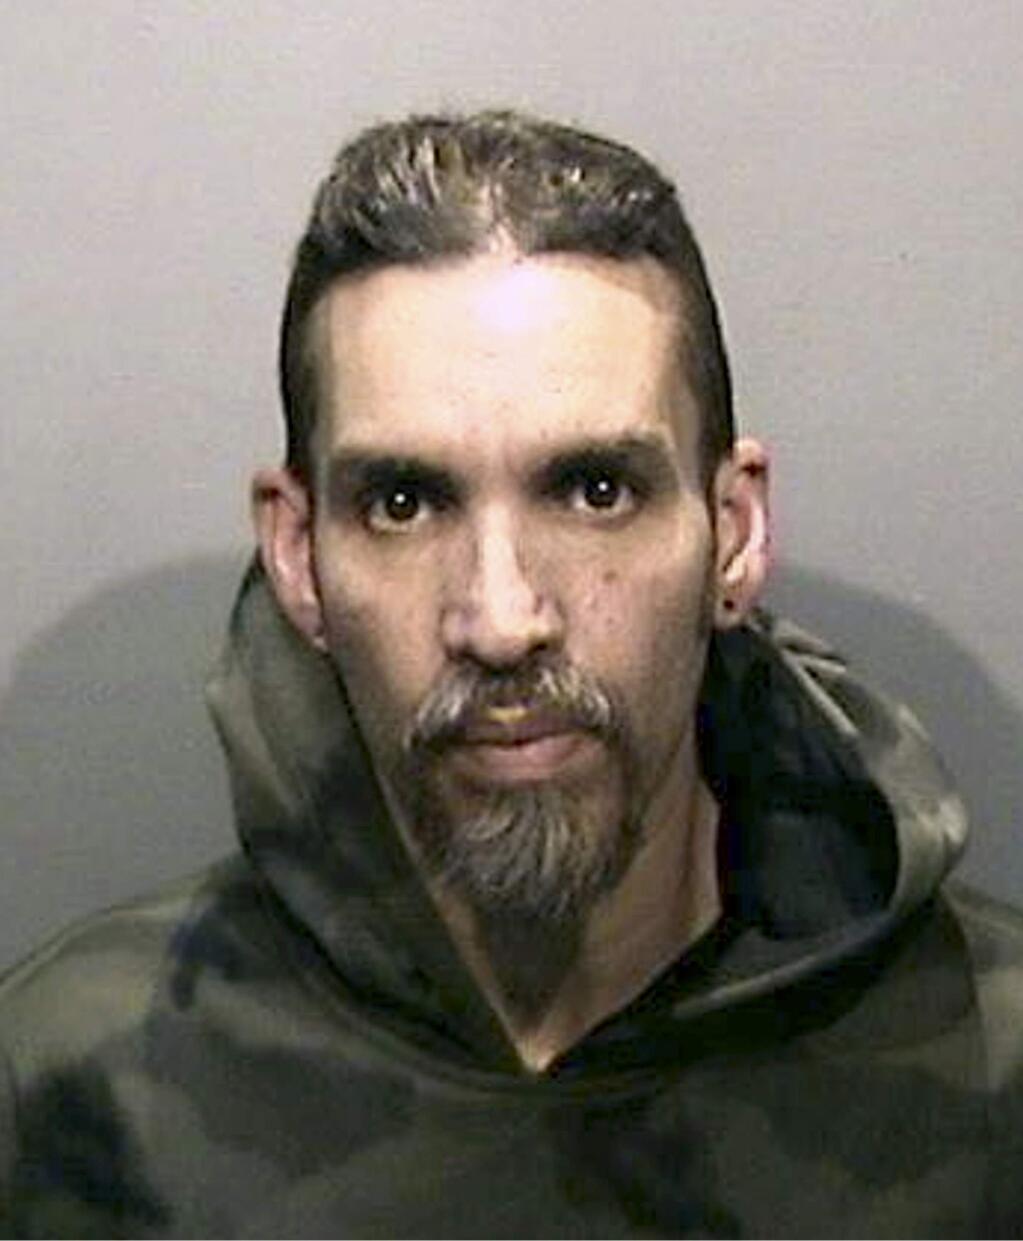 FILE - This Monday, June 5, 2017, file photo released by the Alameda County Sheriff's Office shows Derick Almena at Santa Rita Jail in Alameda County, Calif. The man blamed for the nation's deadliest structure fire in more than 14 years will be arraigned in Northern California on 36 counts of involuntary manslaughter. Almena is scheduled to enter a plea Thursday, June 8, 2017. (Alameda County Sheriff's Office via AP, File)